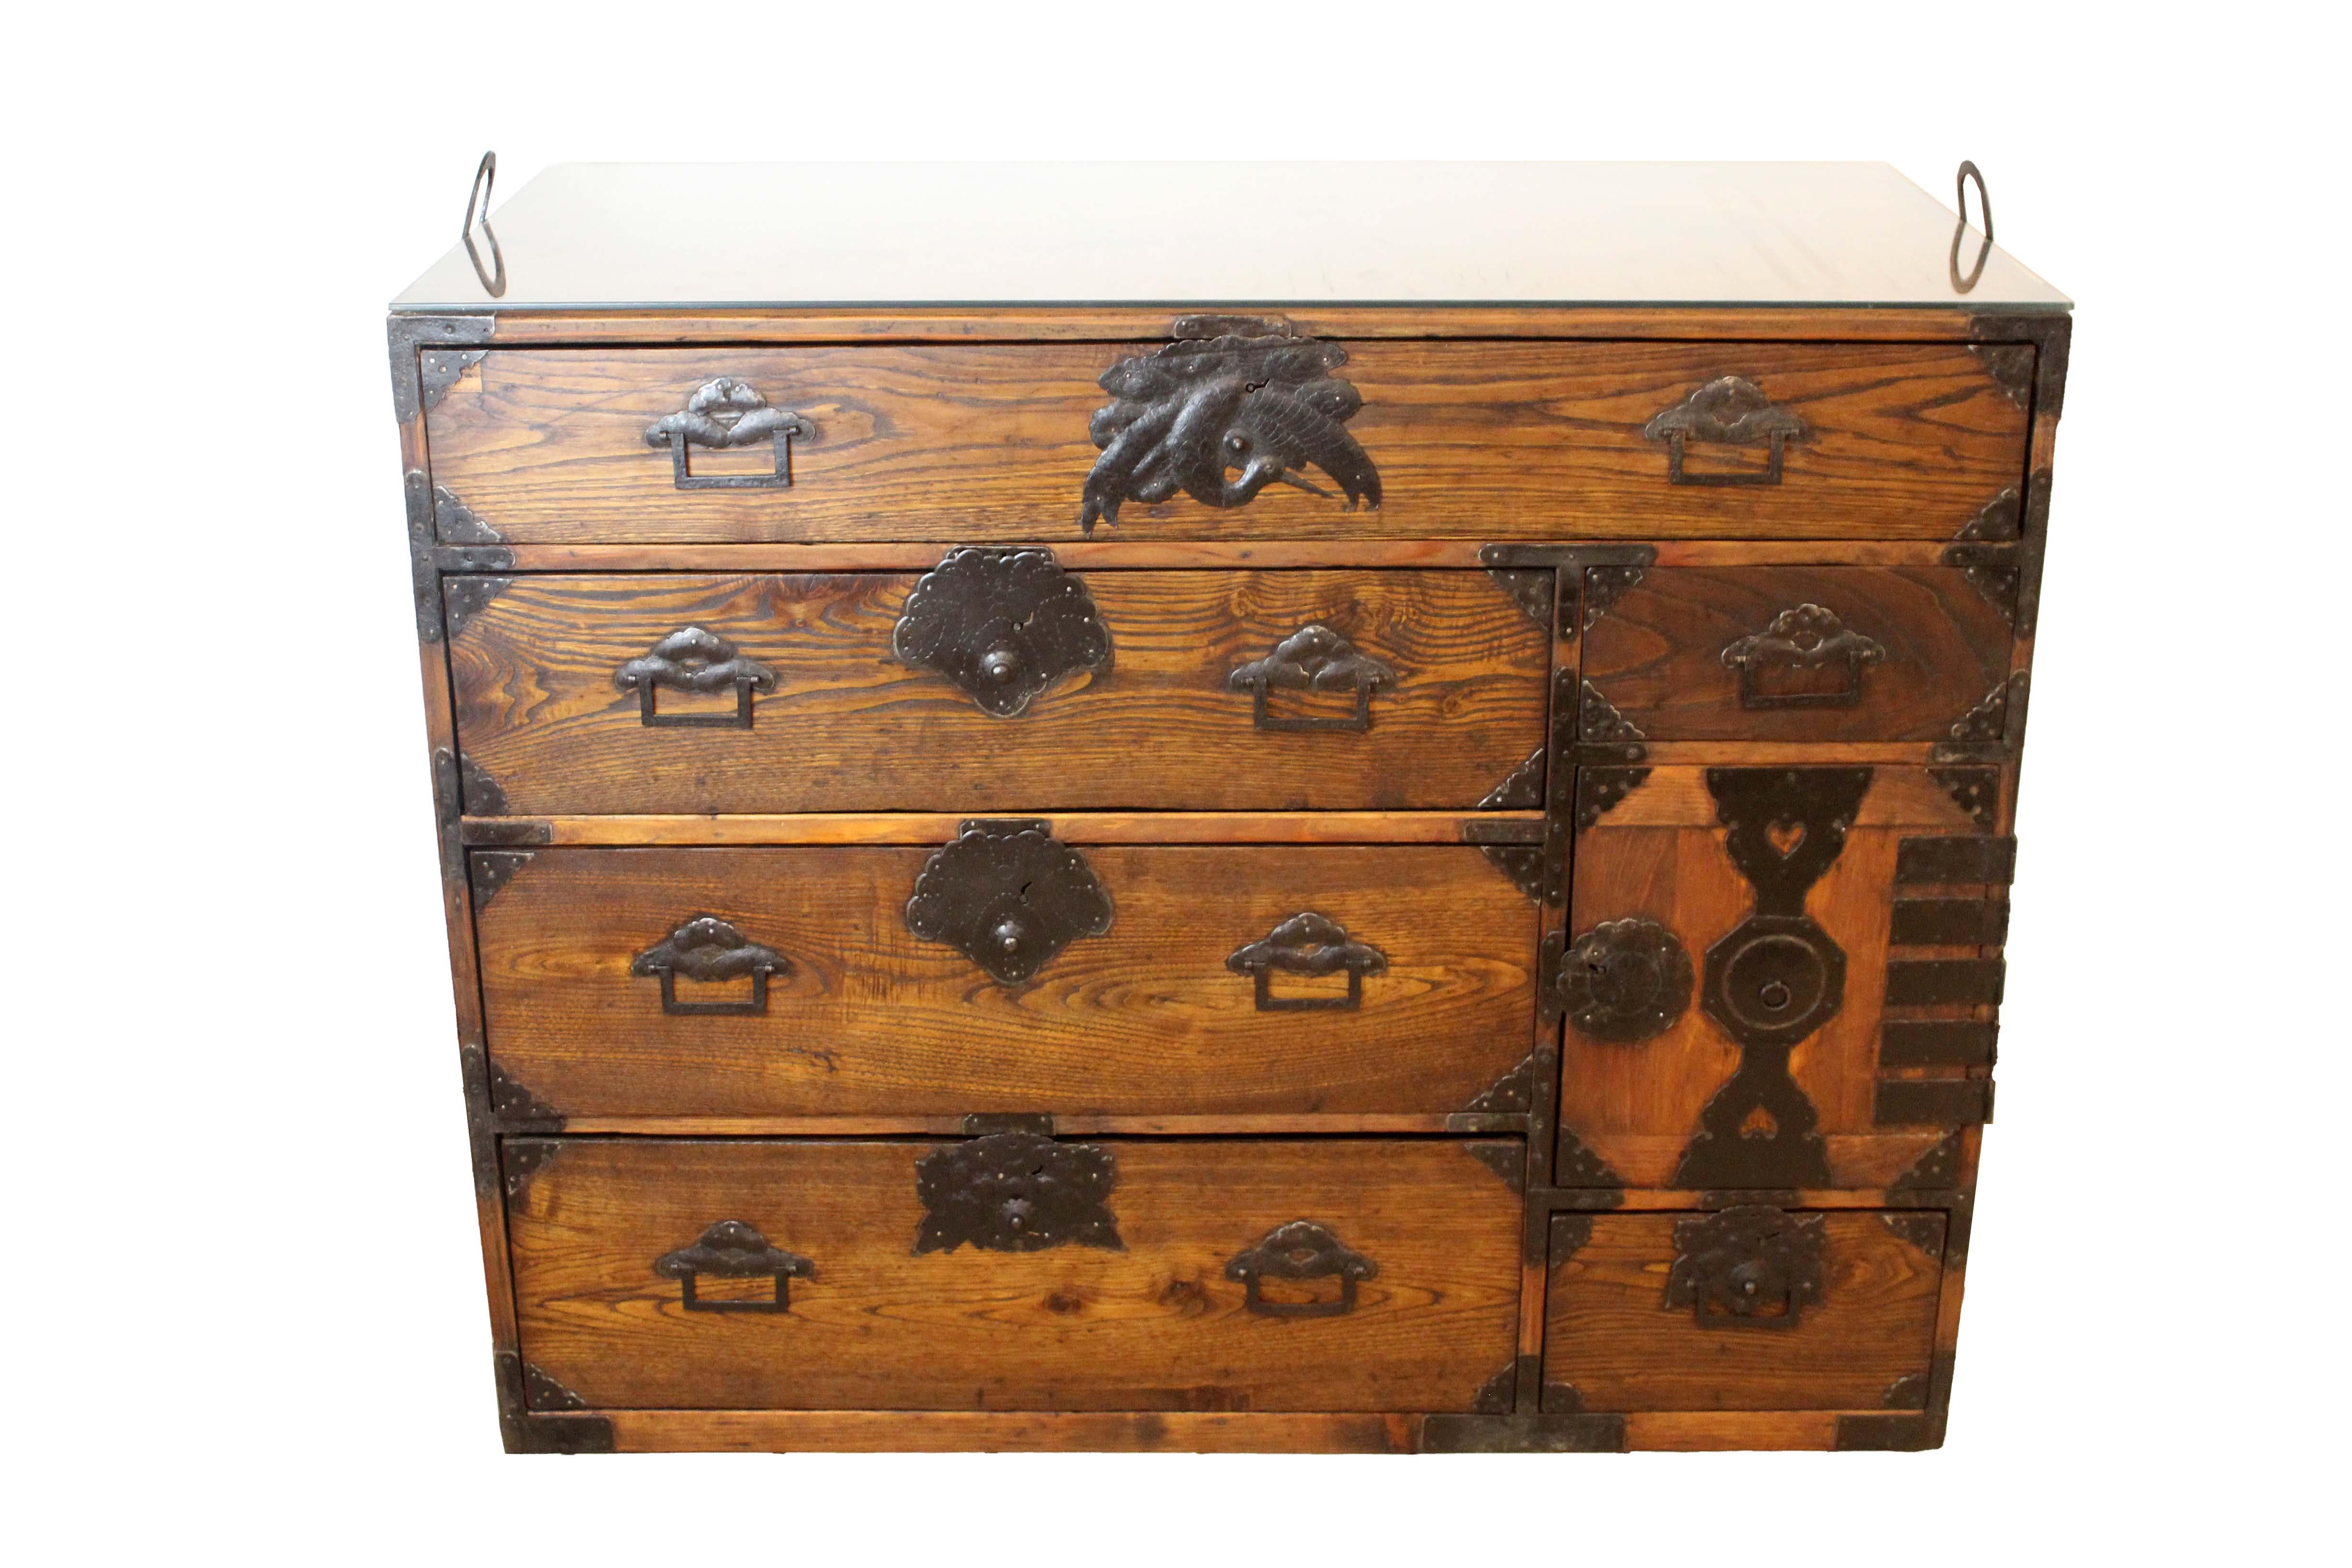 For your consideration is this stunning example of a Japanese Tansu Chest from the Taisho Period made of Keyaki Wood w/ Moko Handles. Dimensions: 43